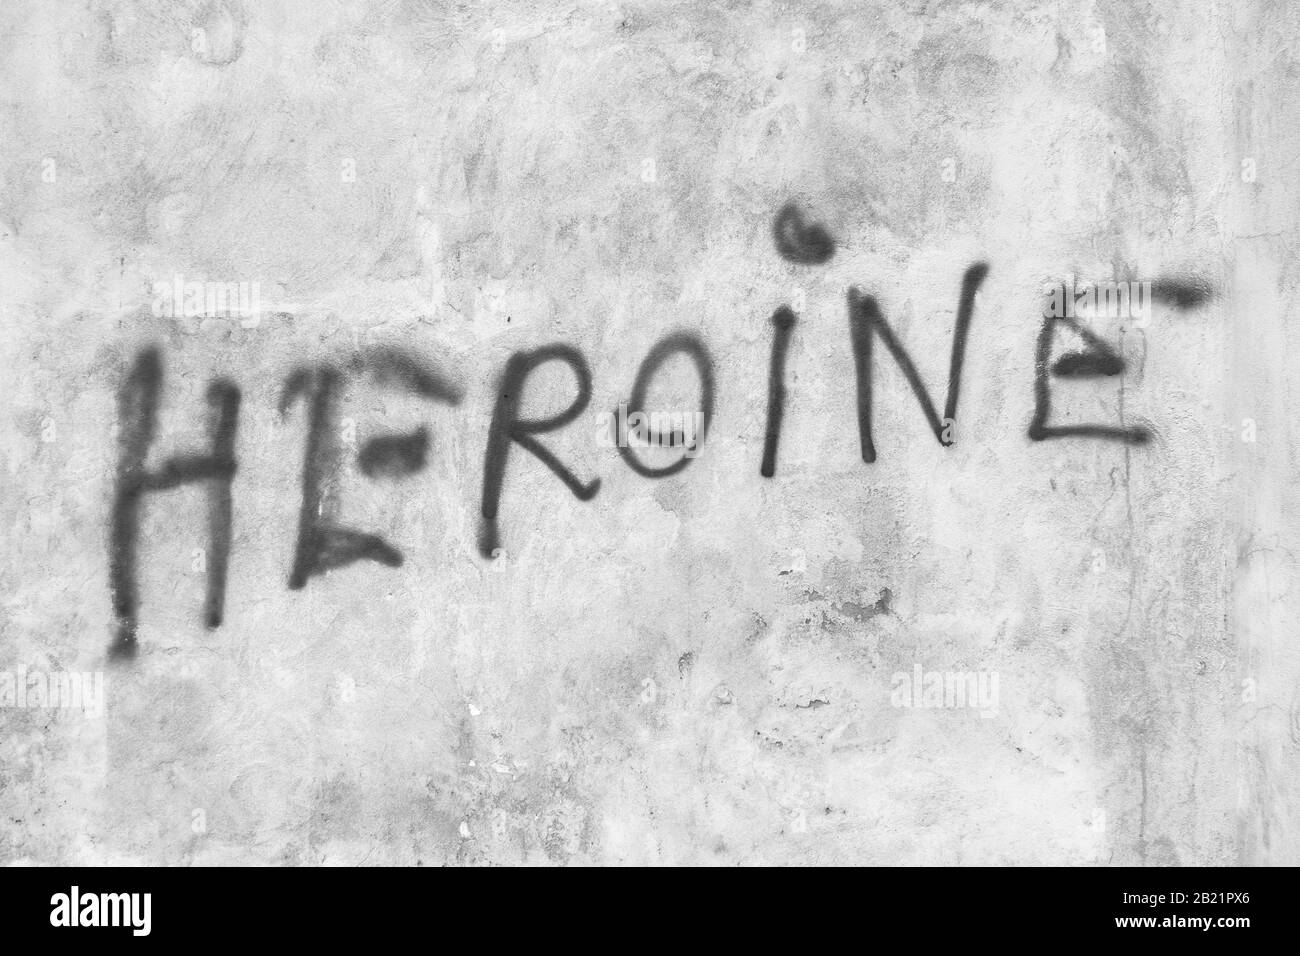 'Heroine' written on the wall. Ideal for concepts. Stock Photo